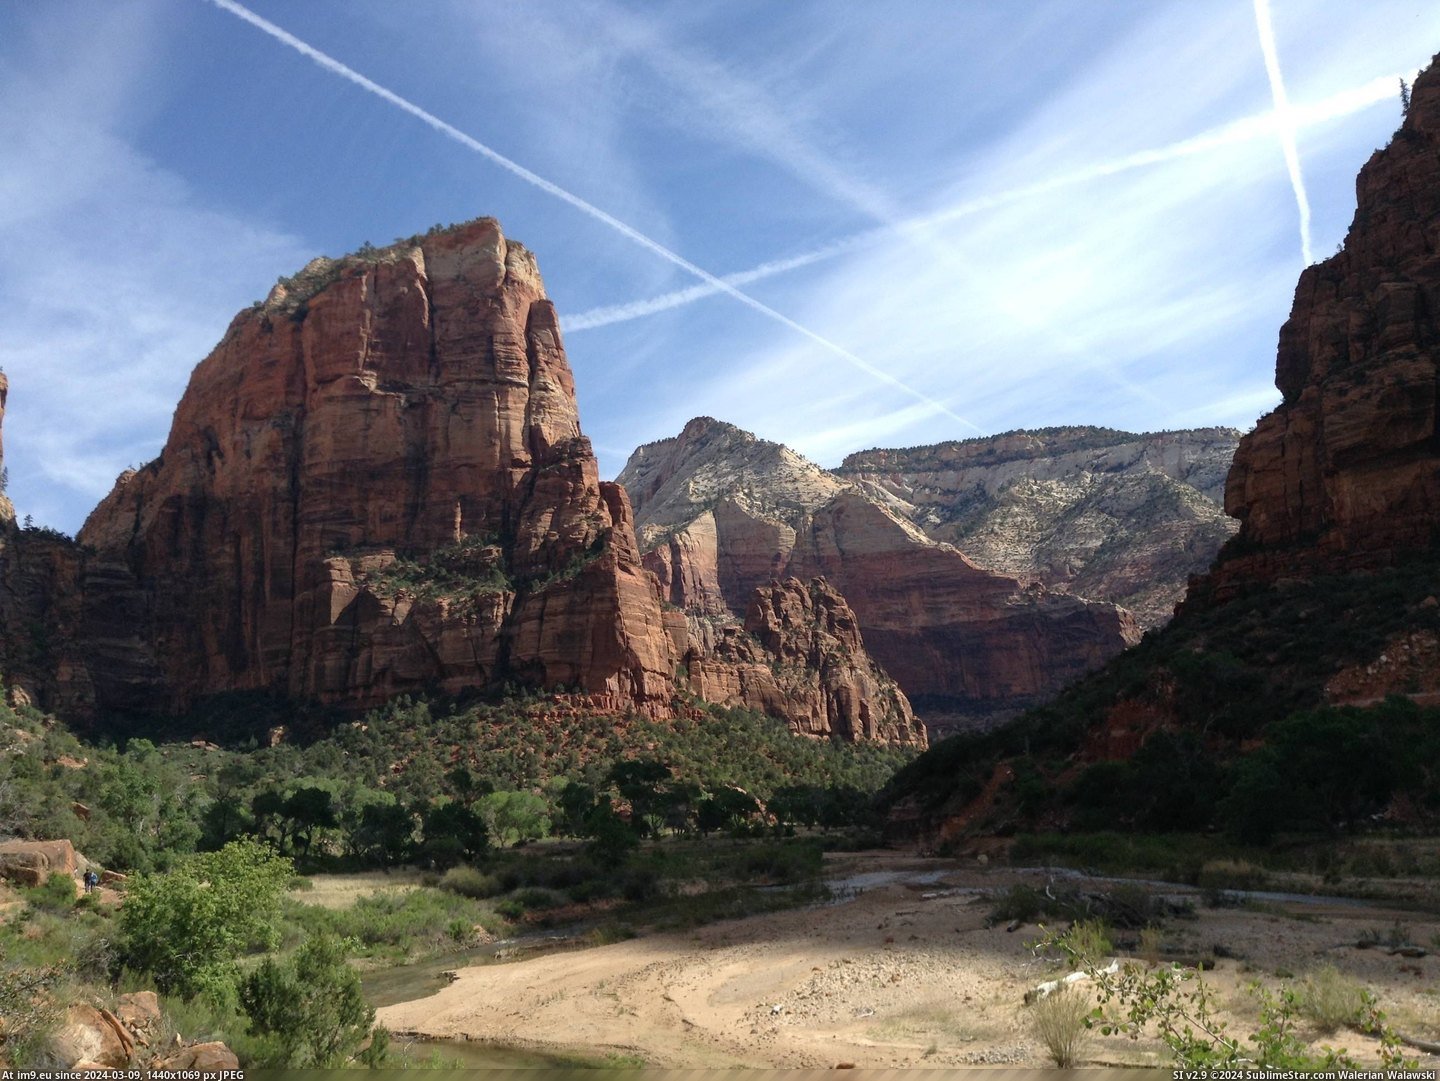 #Day #Park #National #Hike #Landing #Zion #2592x1936 #Angel #Gorgeous #Spring [Earthporn] View of Angel's Landing on a gorgeous spring day - Zion National Park. What a hike! [2592x1936] Pic. (Изображение из альбом My r/EARTHPORN favs))